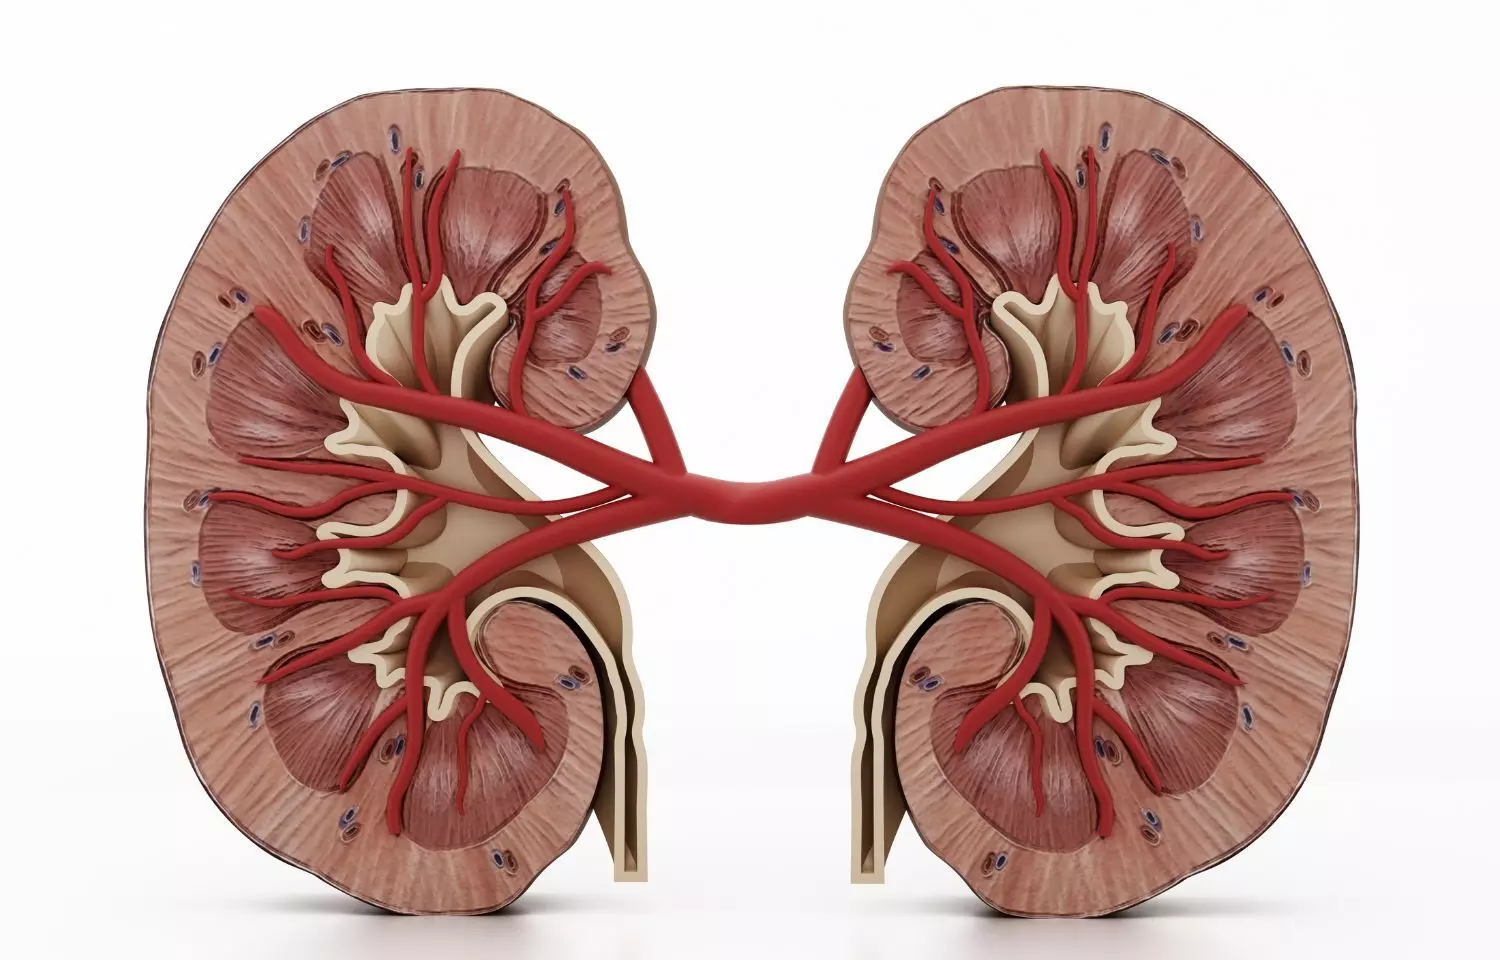 Rosuvastatin linked with signs of kidney damage in real world data